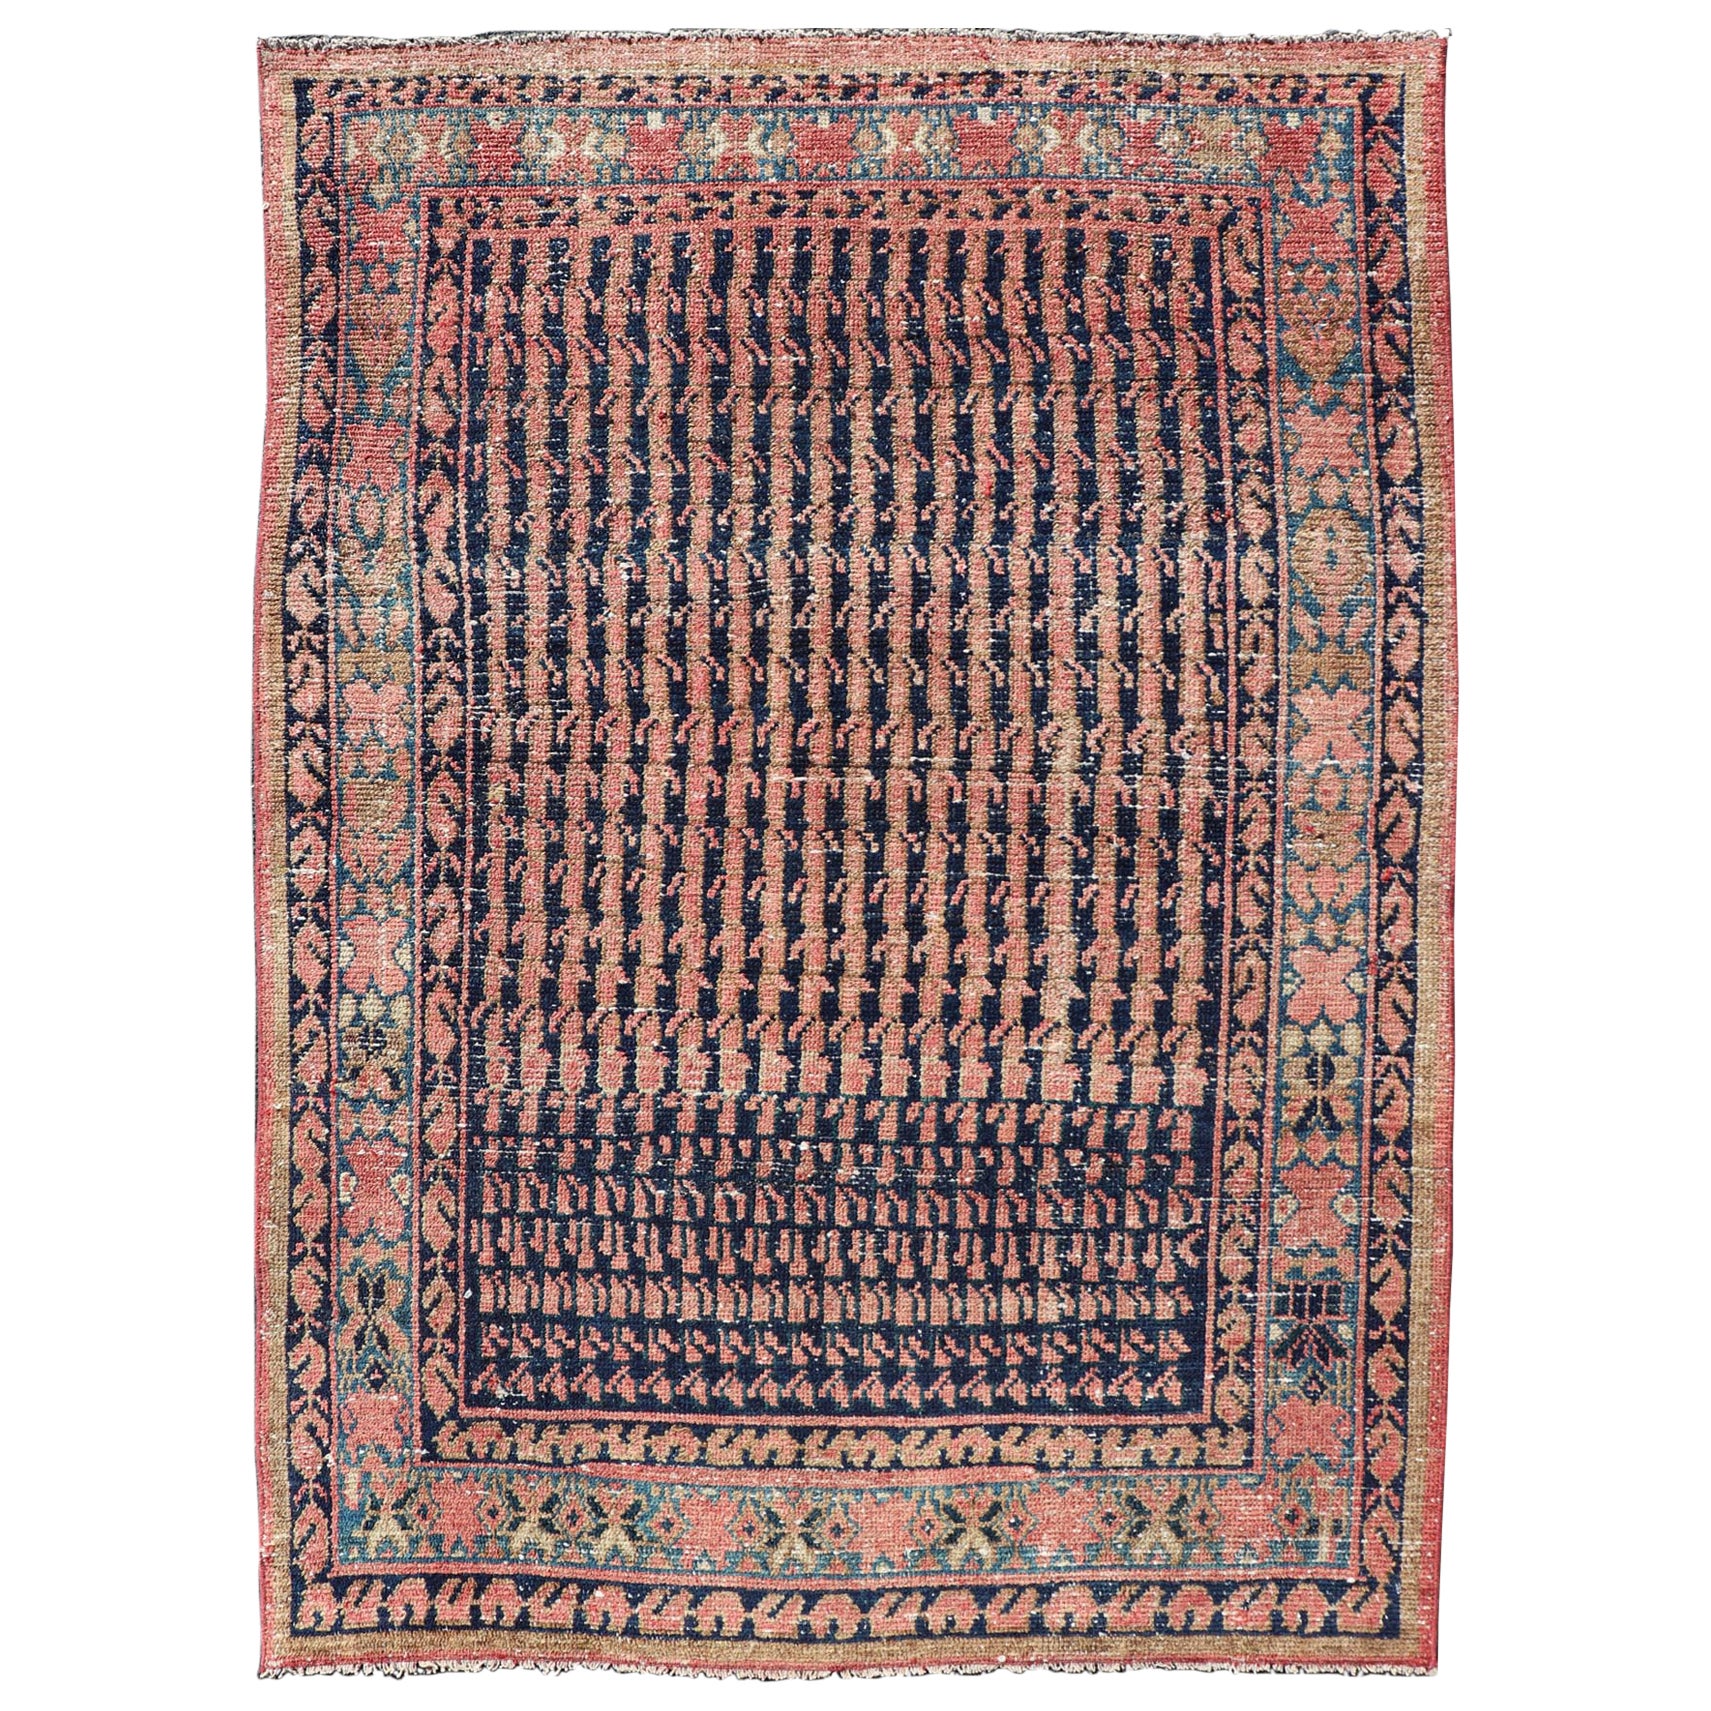 Colorful Antique Persian Hand Knotted Hamadan Rug with All-Over Tribal Motifs